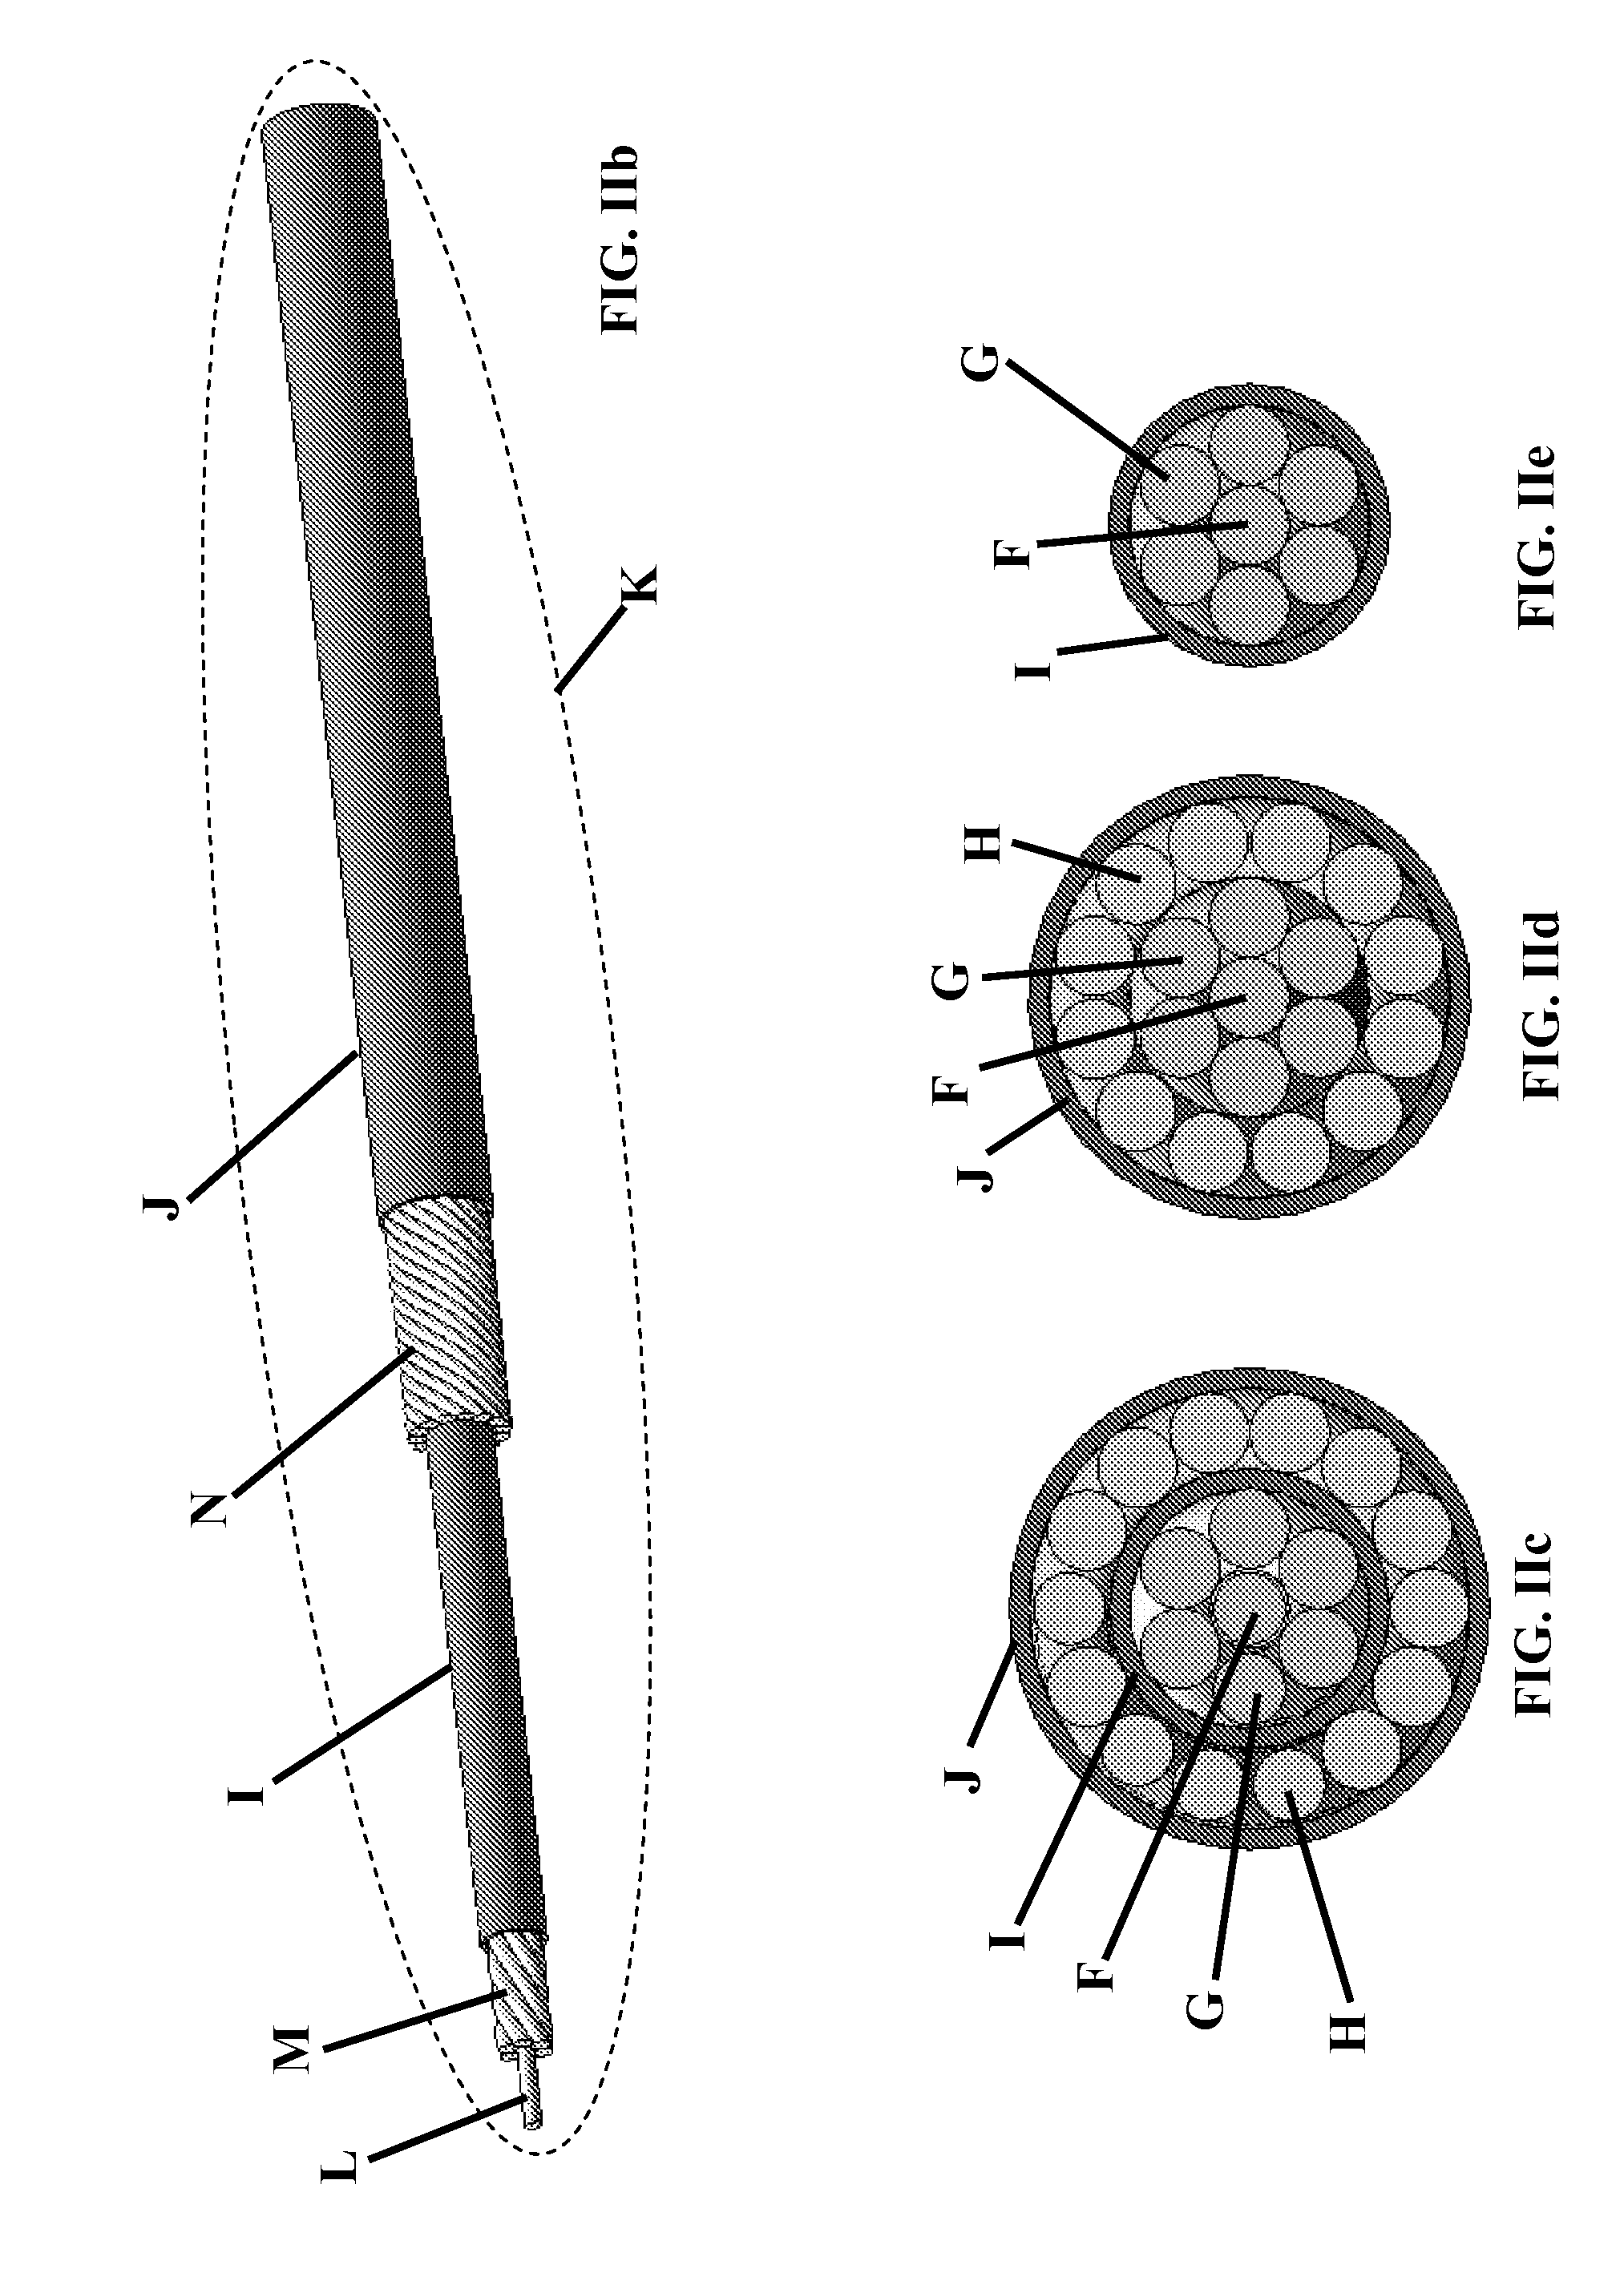 Reduction of RF induced tissue heating using conductive surface pattern